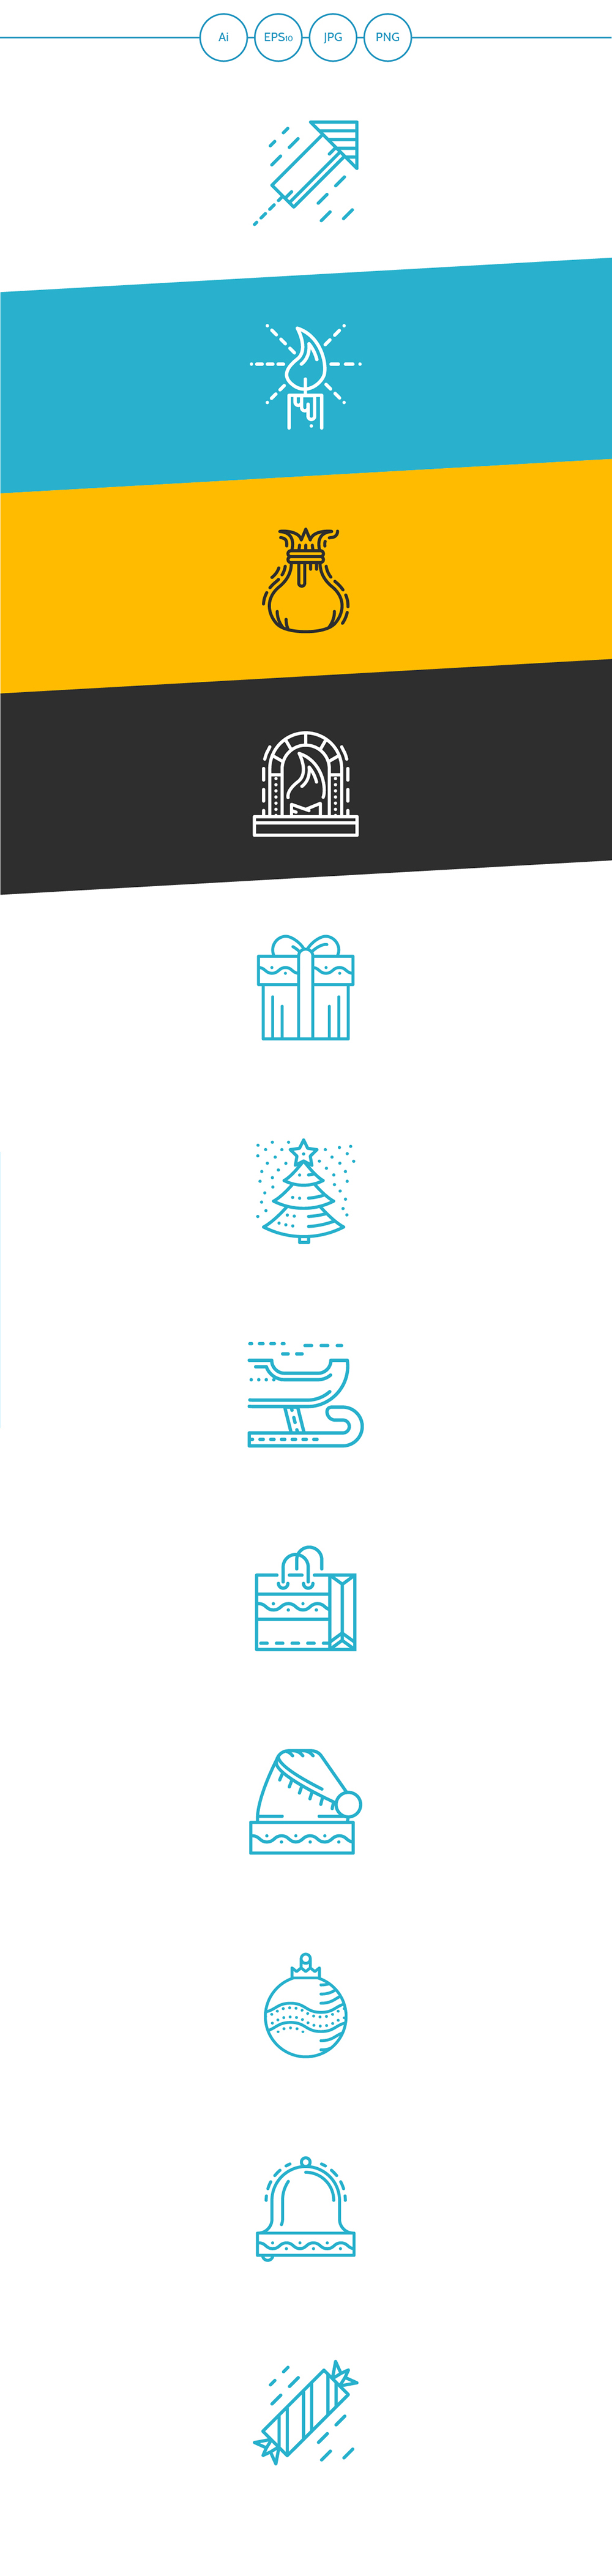 Icon Merry Christmas happy new year line vector line icon xmas design free icon download Speed Art lineart line art Christmas Holiday